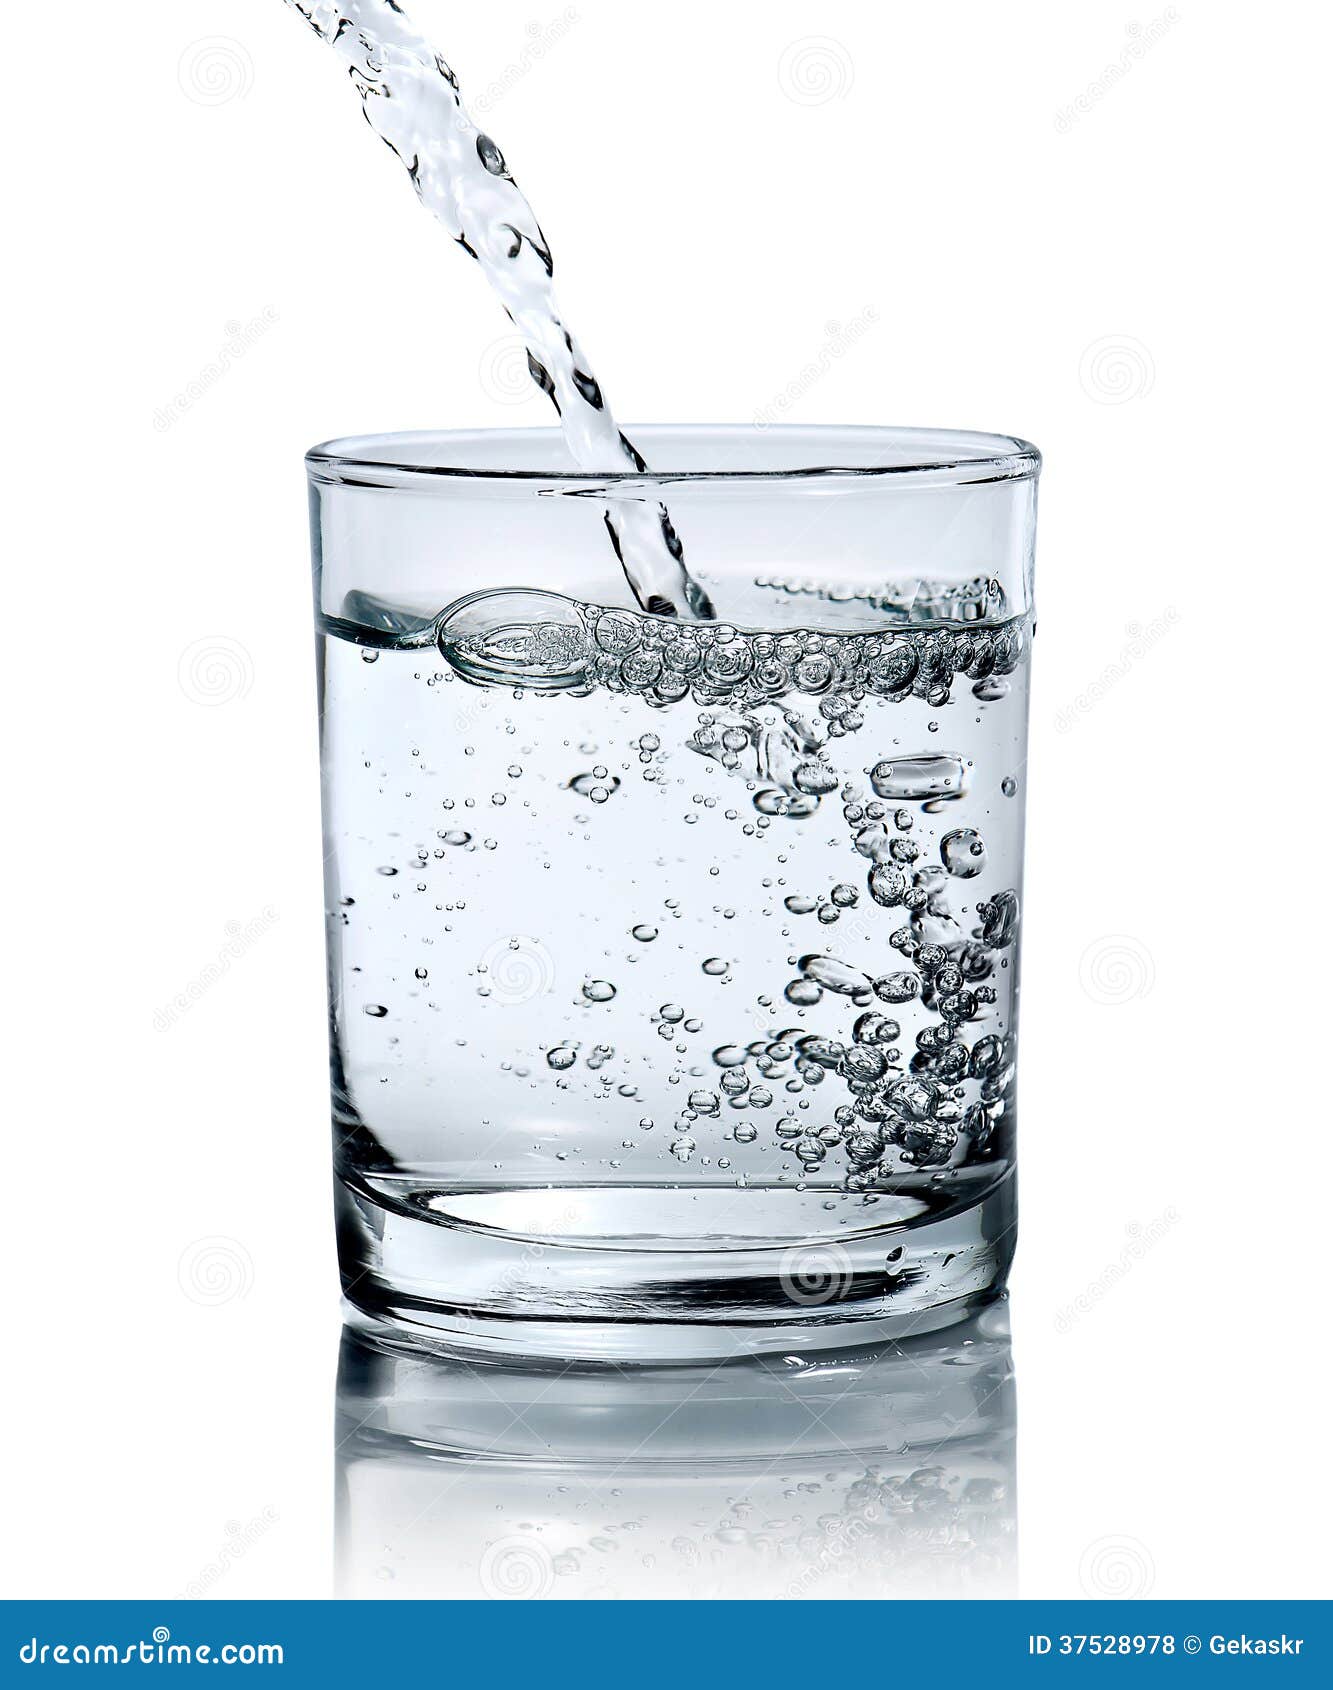 List 104+ Images water being poured into a glass Latest